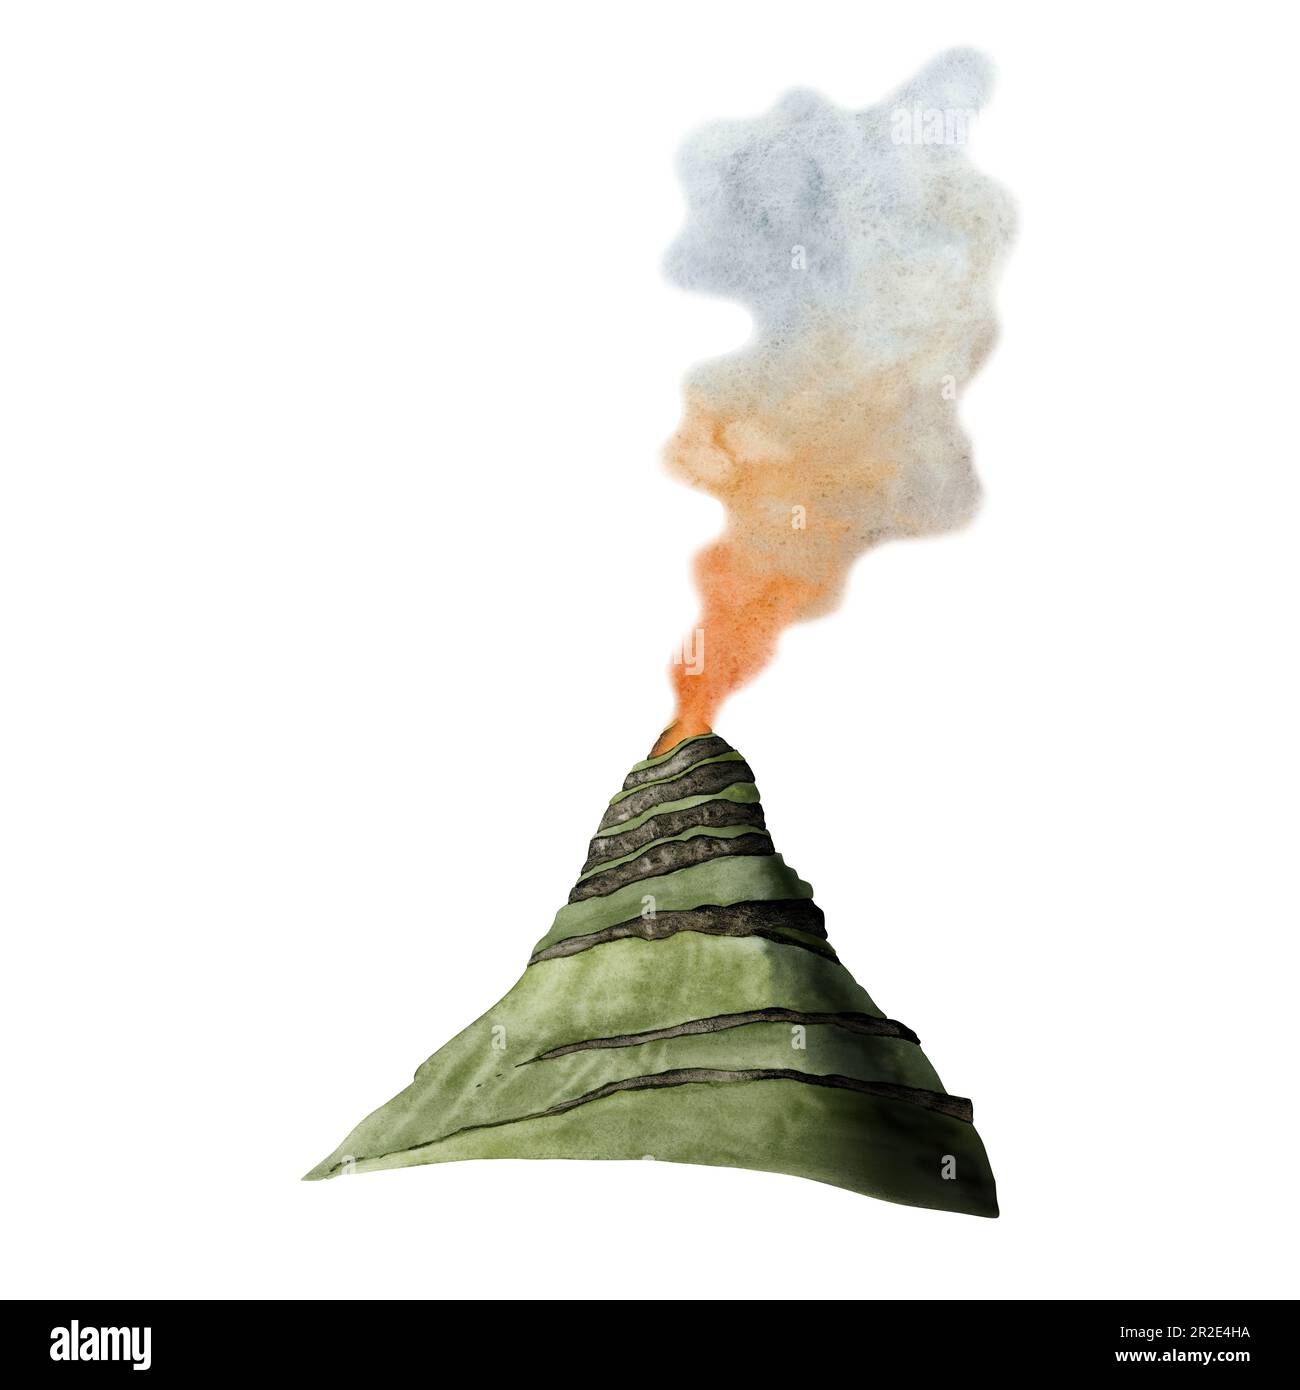 Active volcano with smoke from dinosaurs era, green mountain Illustration isolated on white background in orange, blue and brown colors Stock Photo